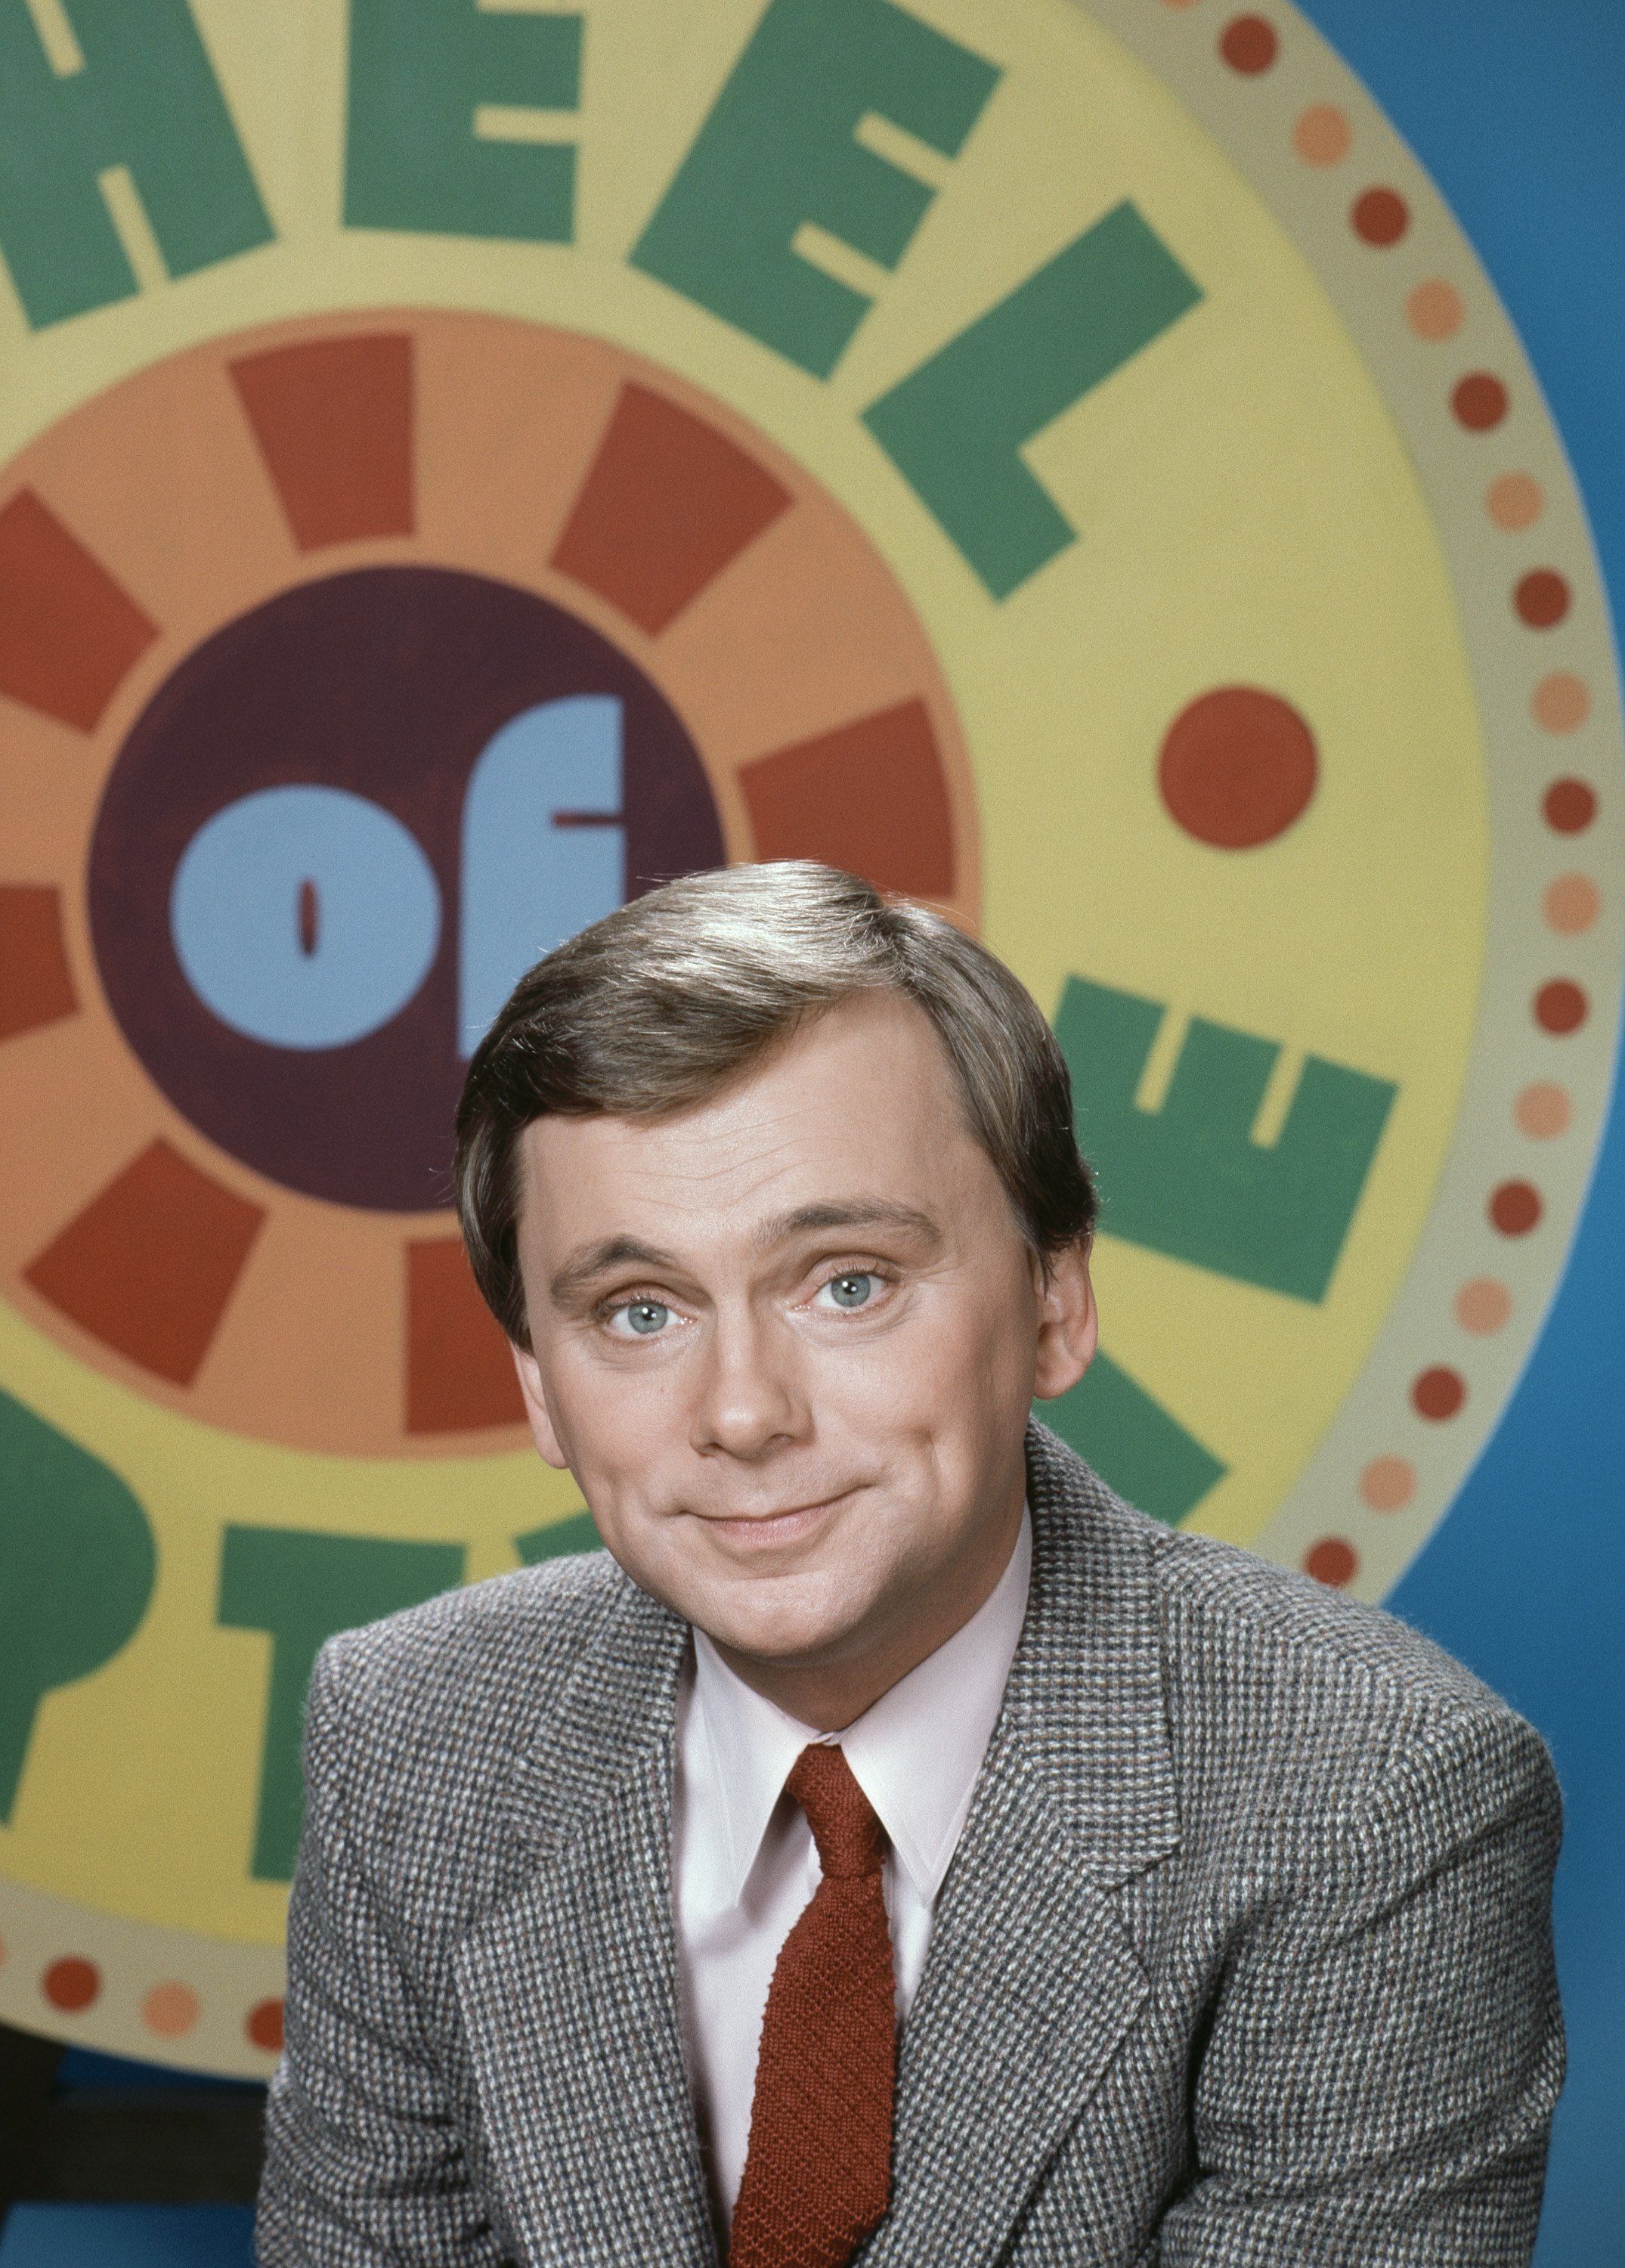 Pat Sajak poses for "Wheel of Fortune." | Source: Getty Images